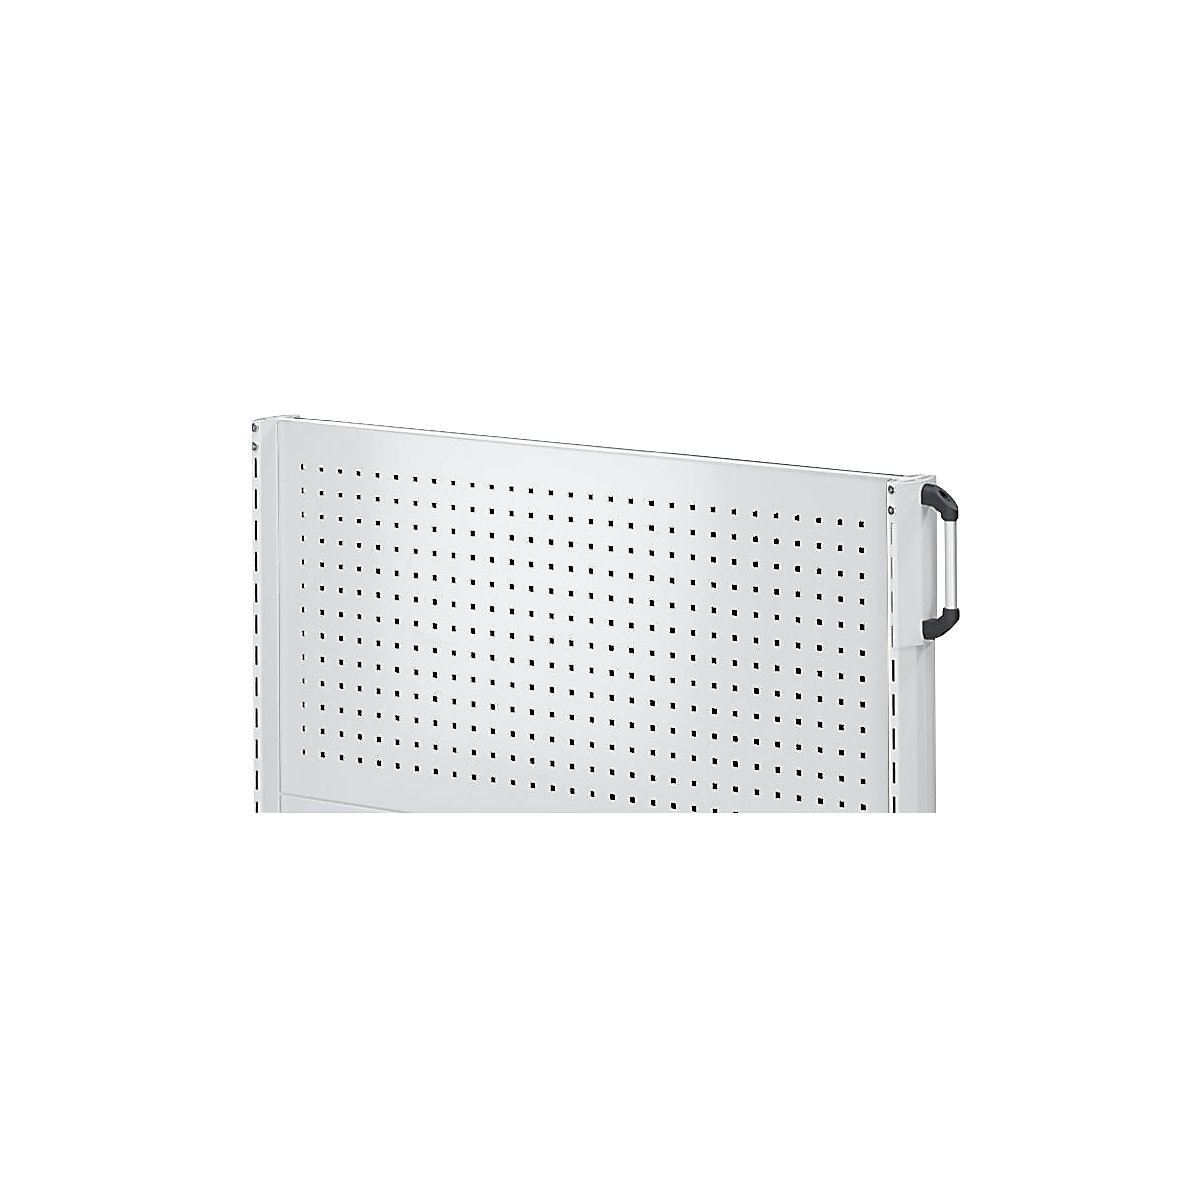 Perforated panel - ANKE